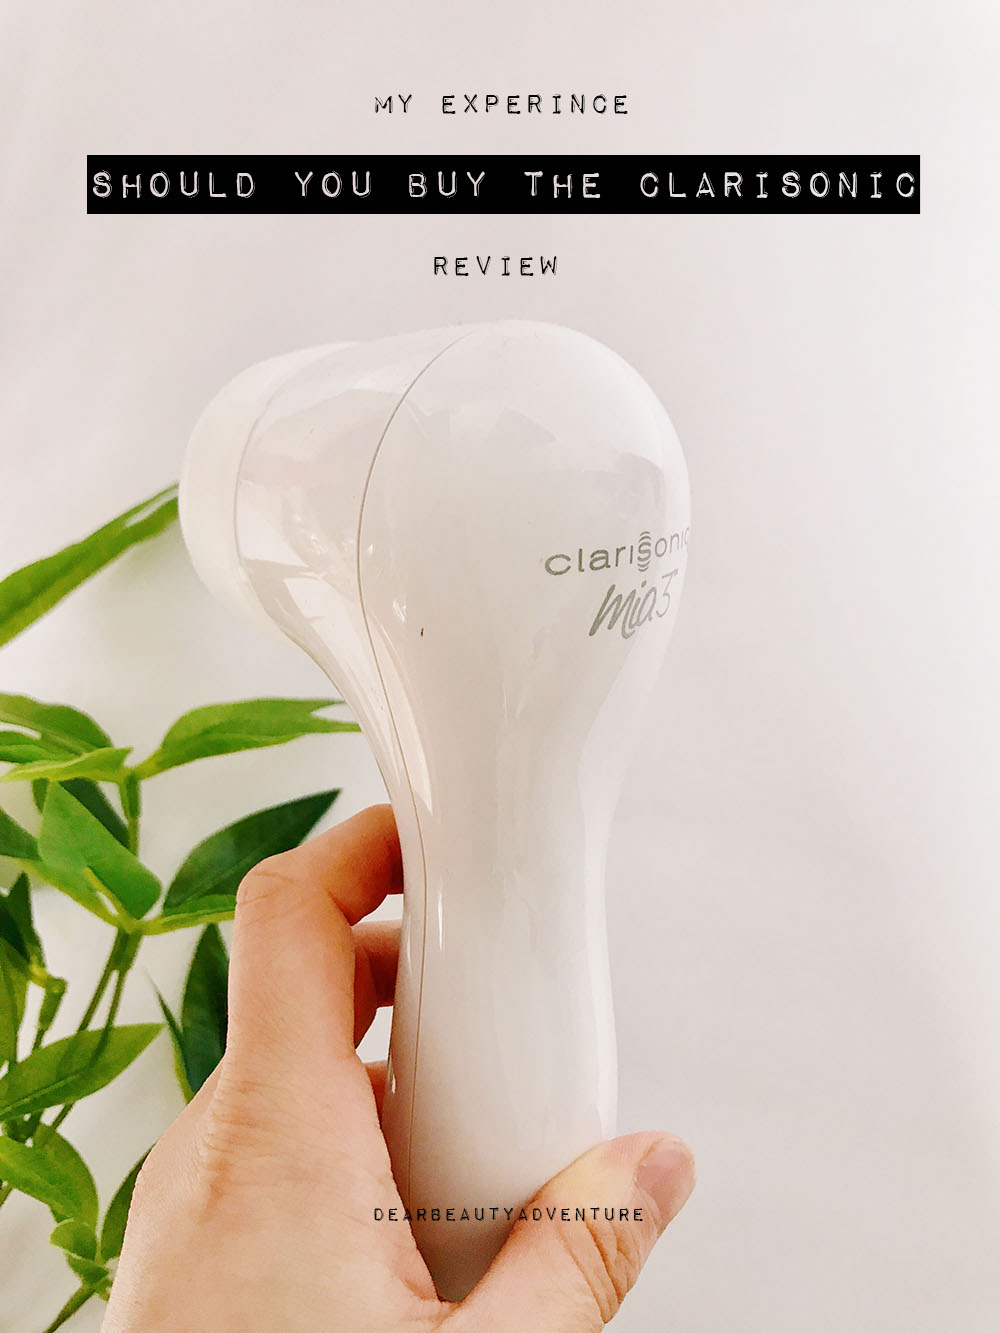 There is a time when every beauty junkie, ask themselves if they should invest in the Clarisonic or not? In this post, you can read about my experience after using the Clarisonic